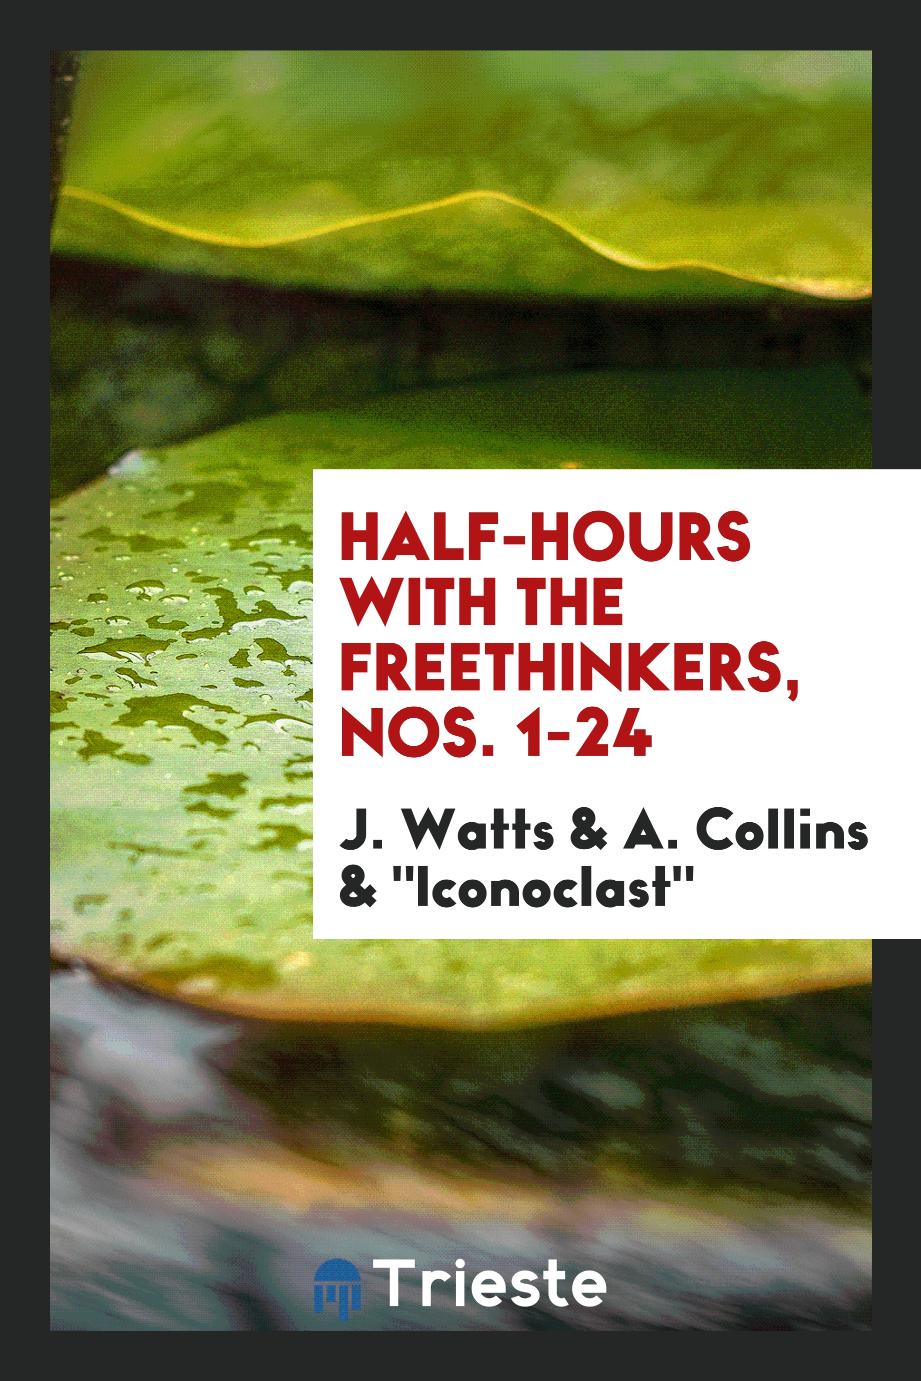 Half-Hours with the Freethinkers, Nos. 1-24